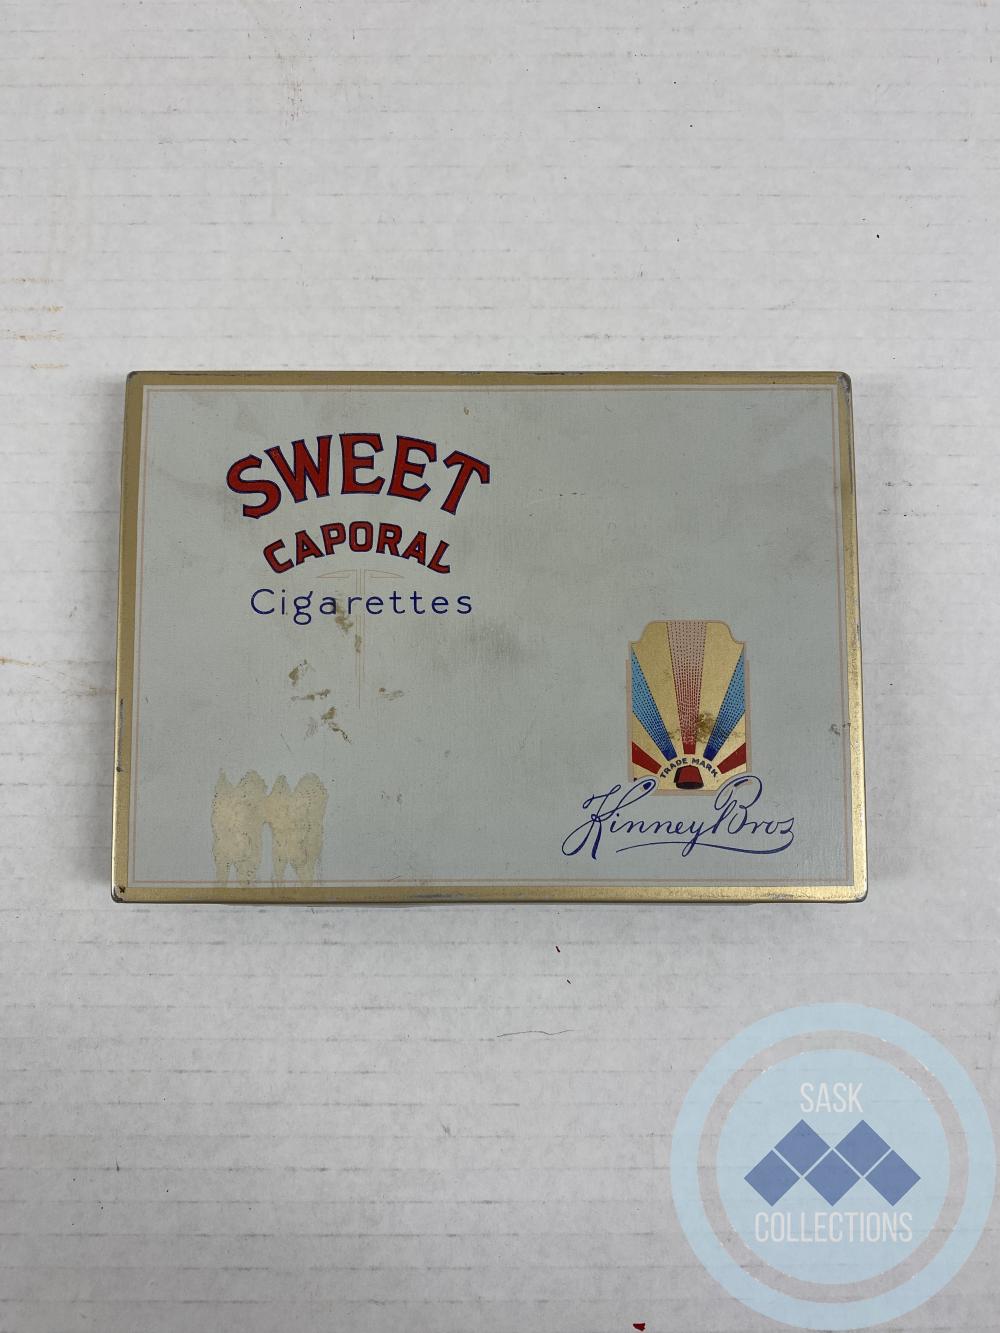 Cigarette Tin Boxes - Sweet Caporal